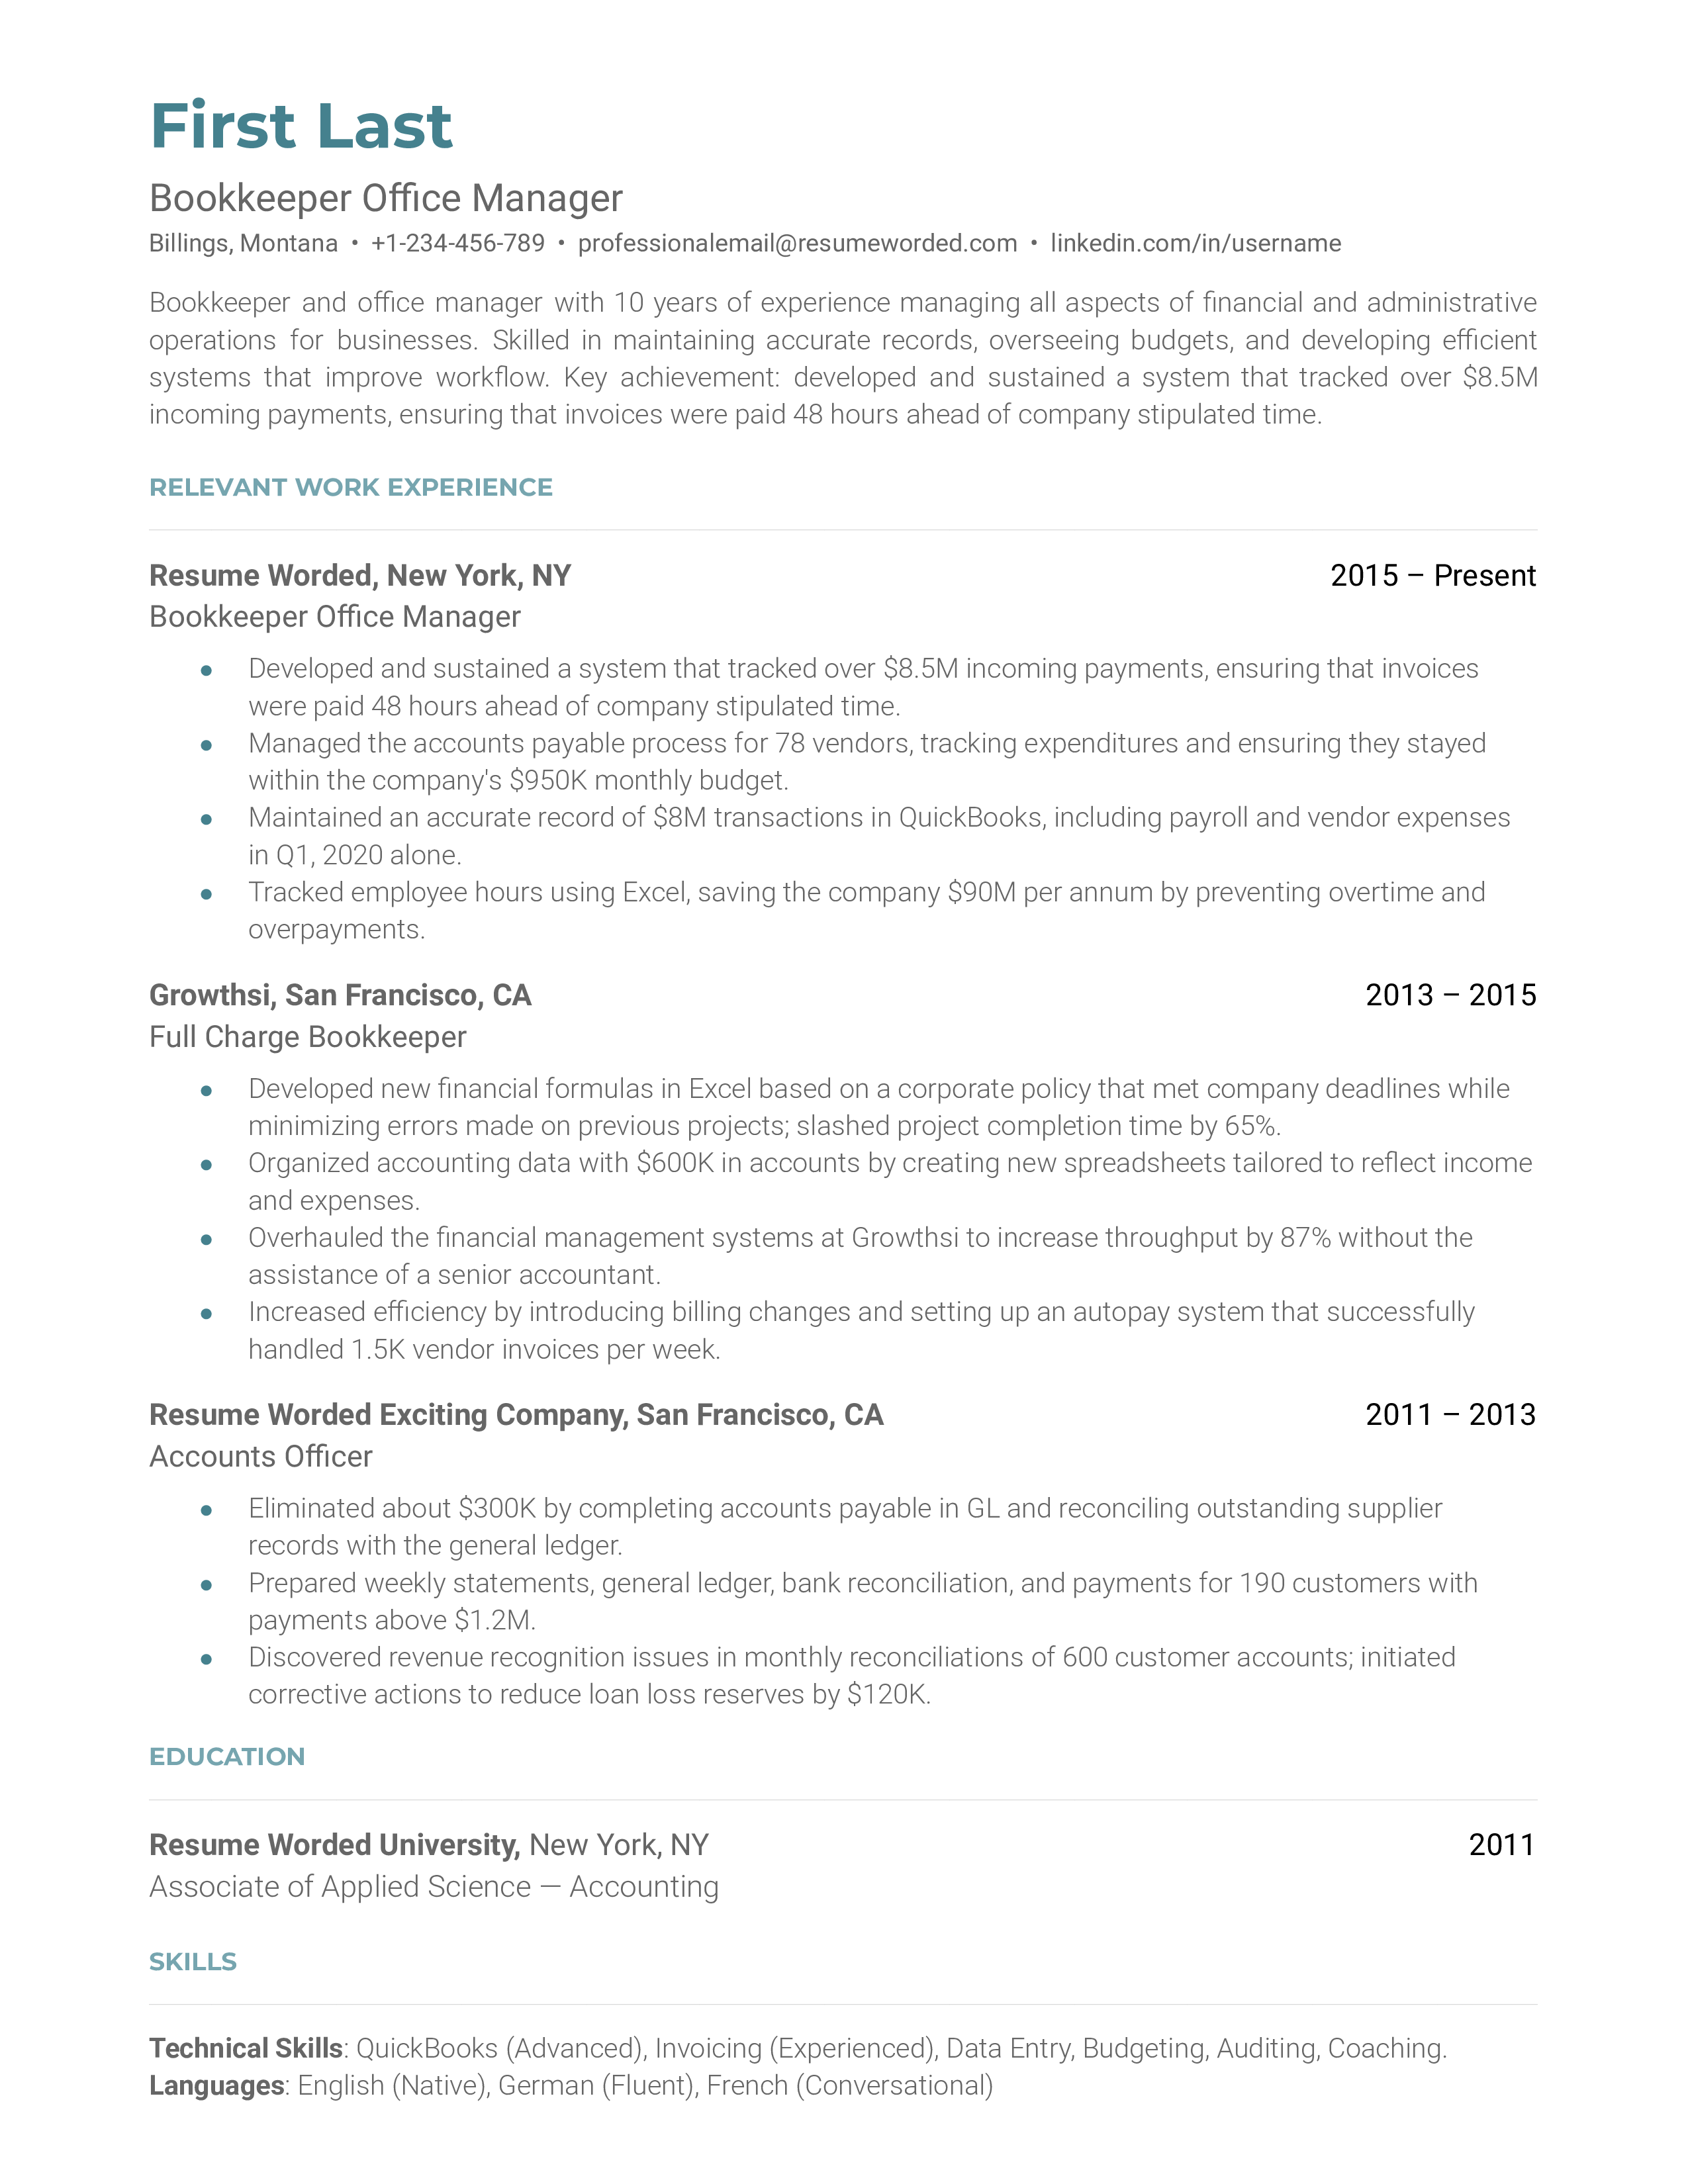 An organized CV for a Bookkeeper Office Manager showcasing their bookkeeping and office management skills.